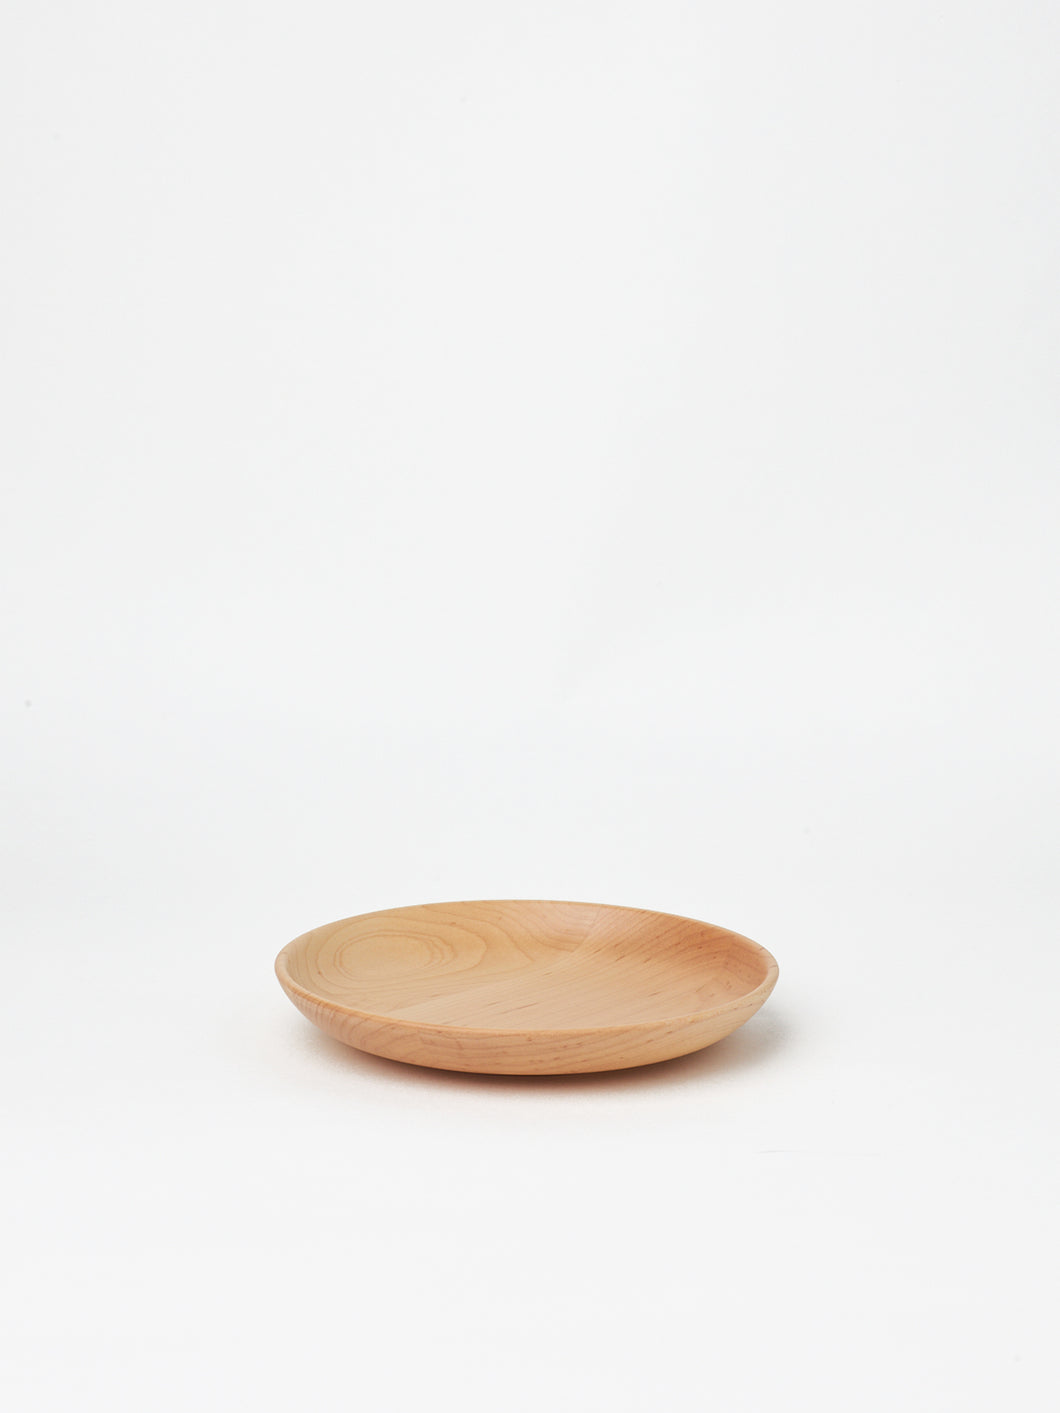 Natural Maple Plate by Taffeta in small size